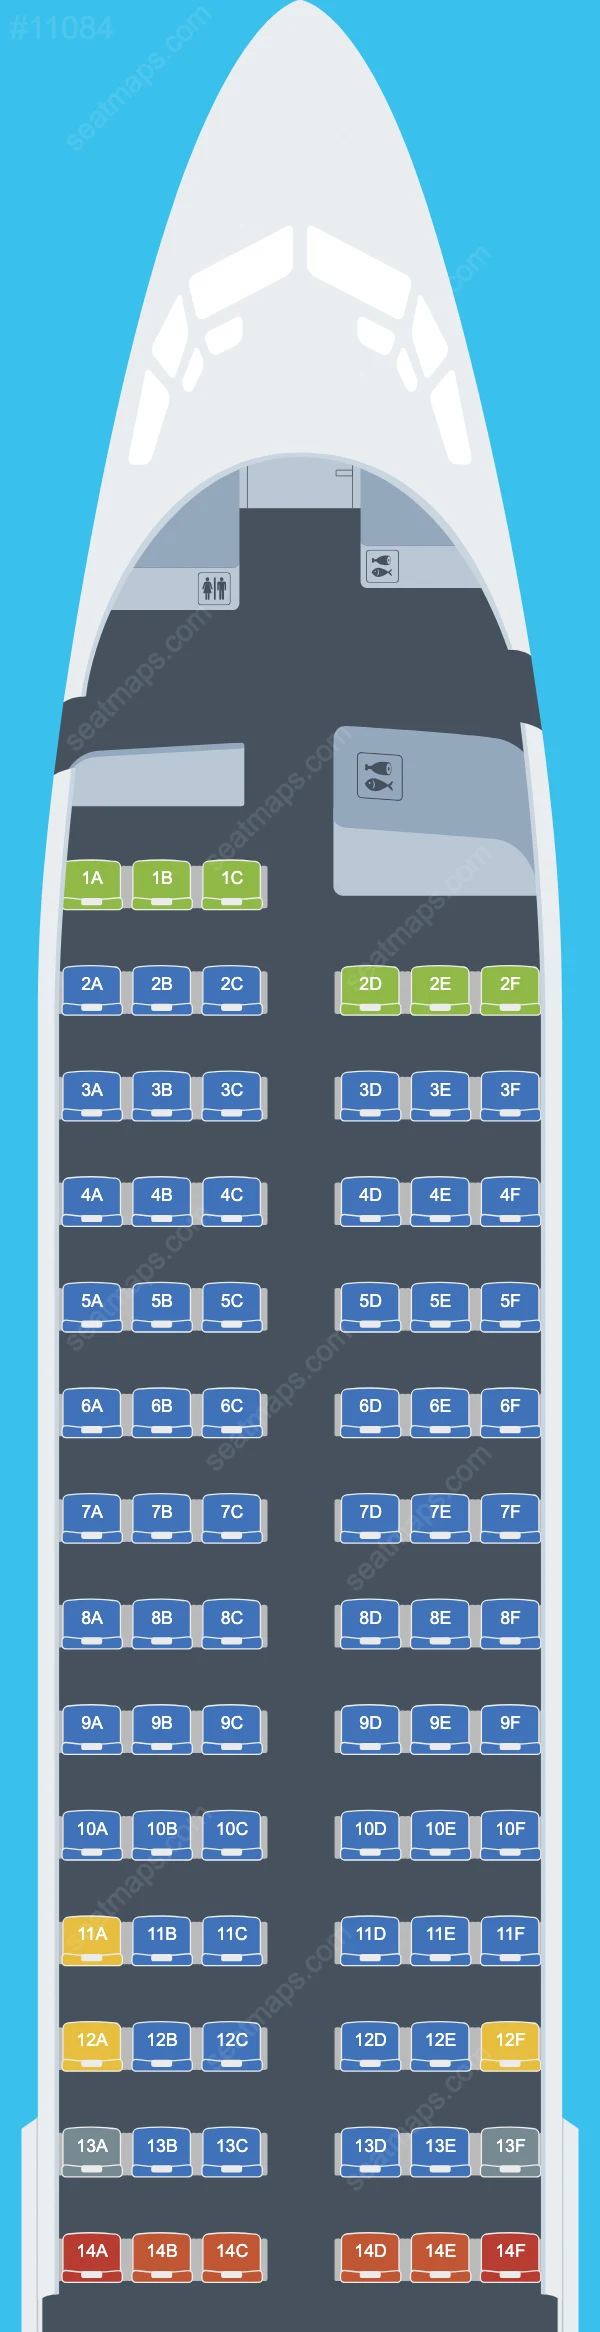 Greater Bay Airlines Boeing 737 Seat Maps 737-800